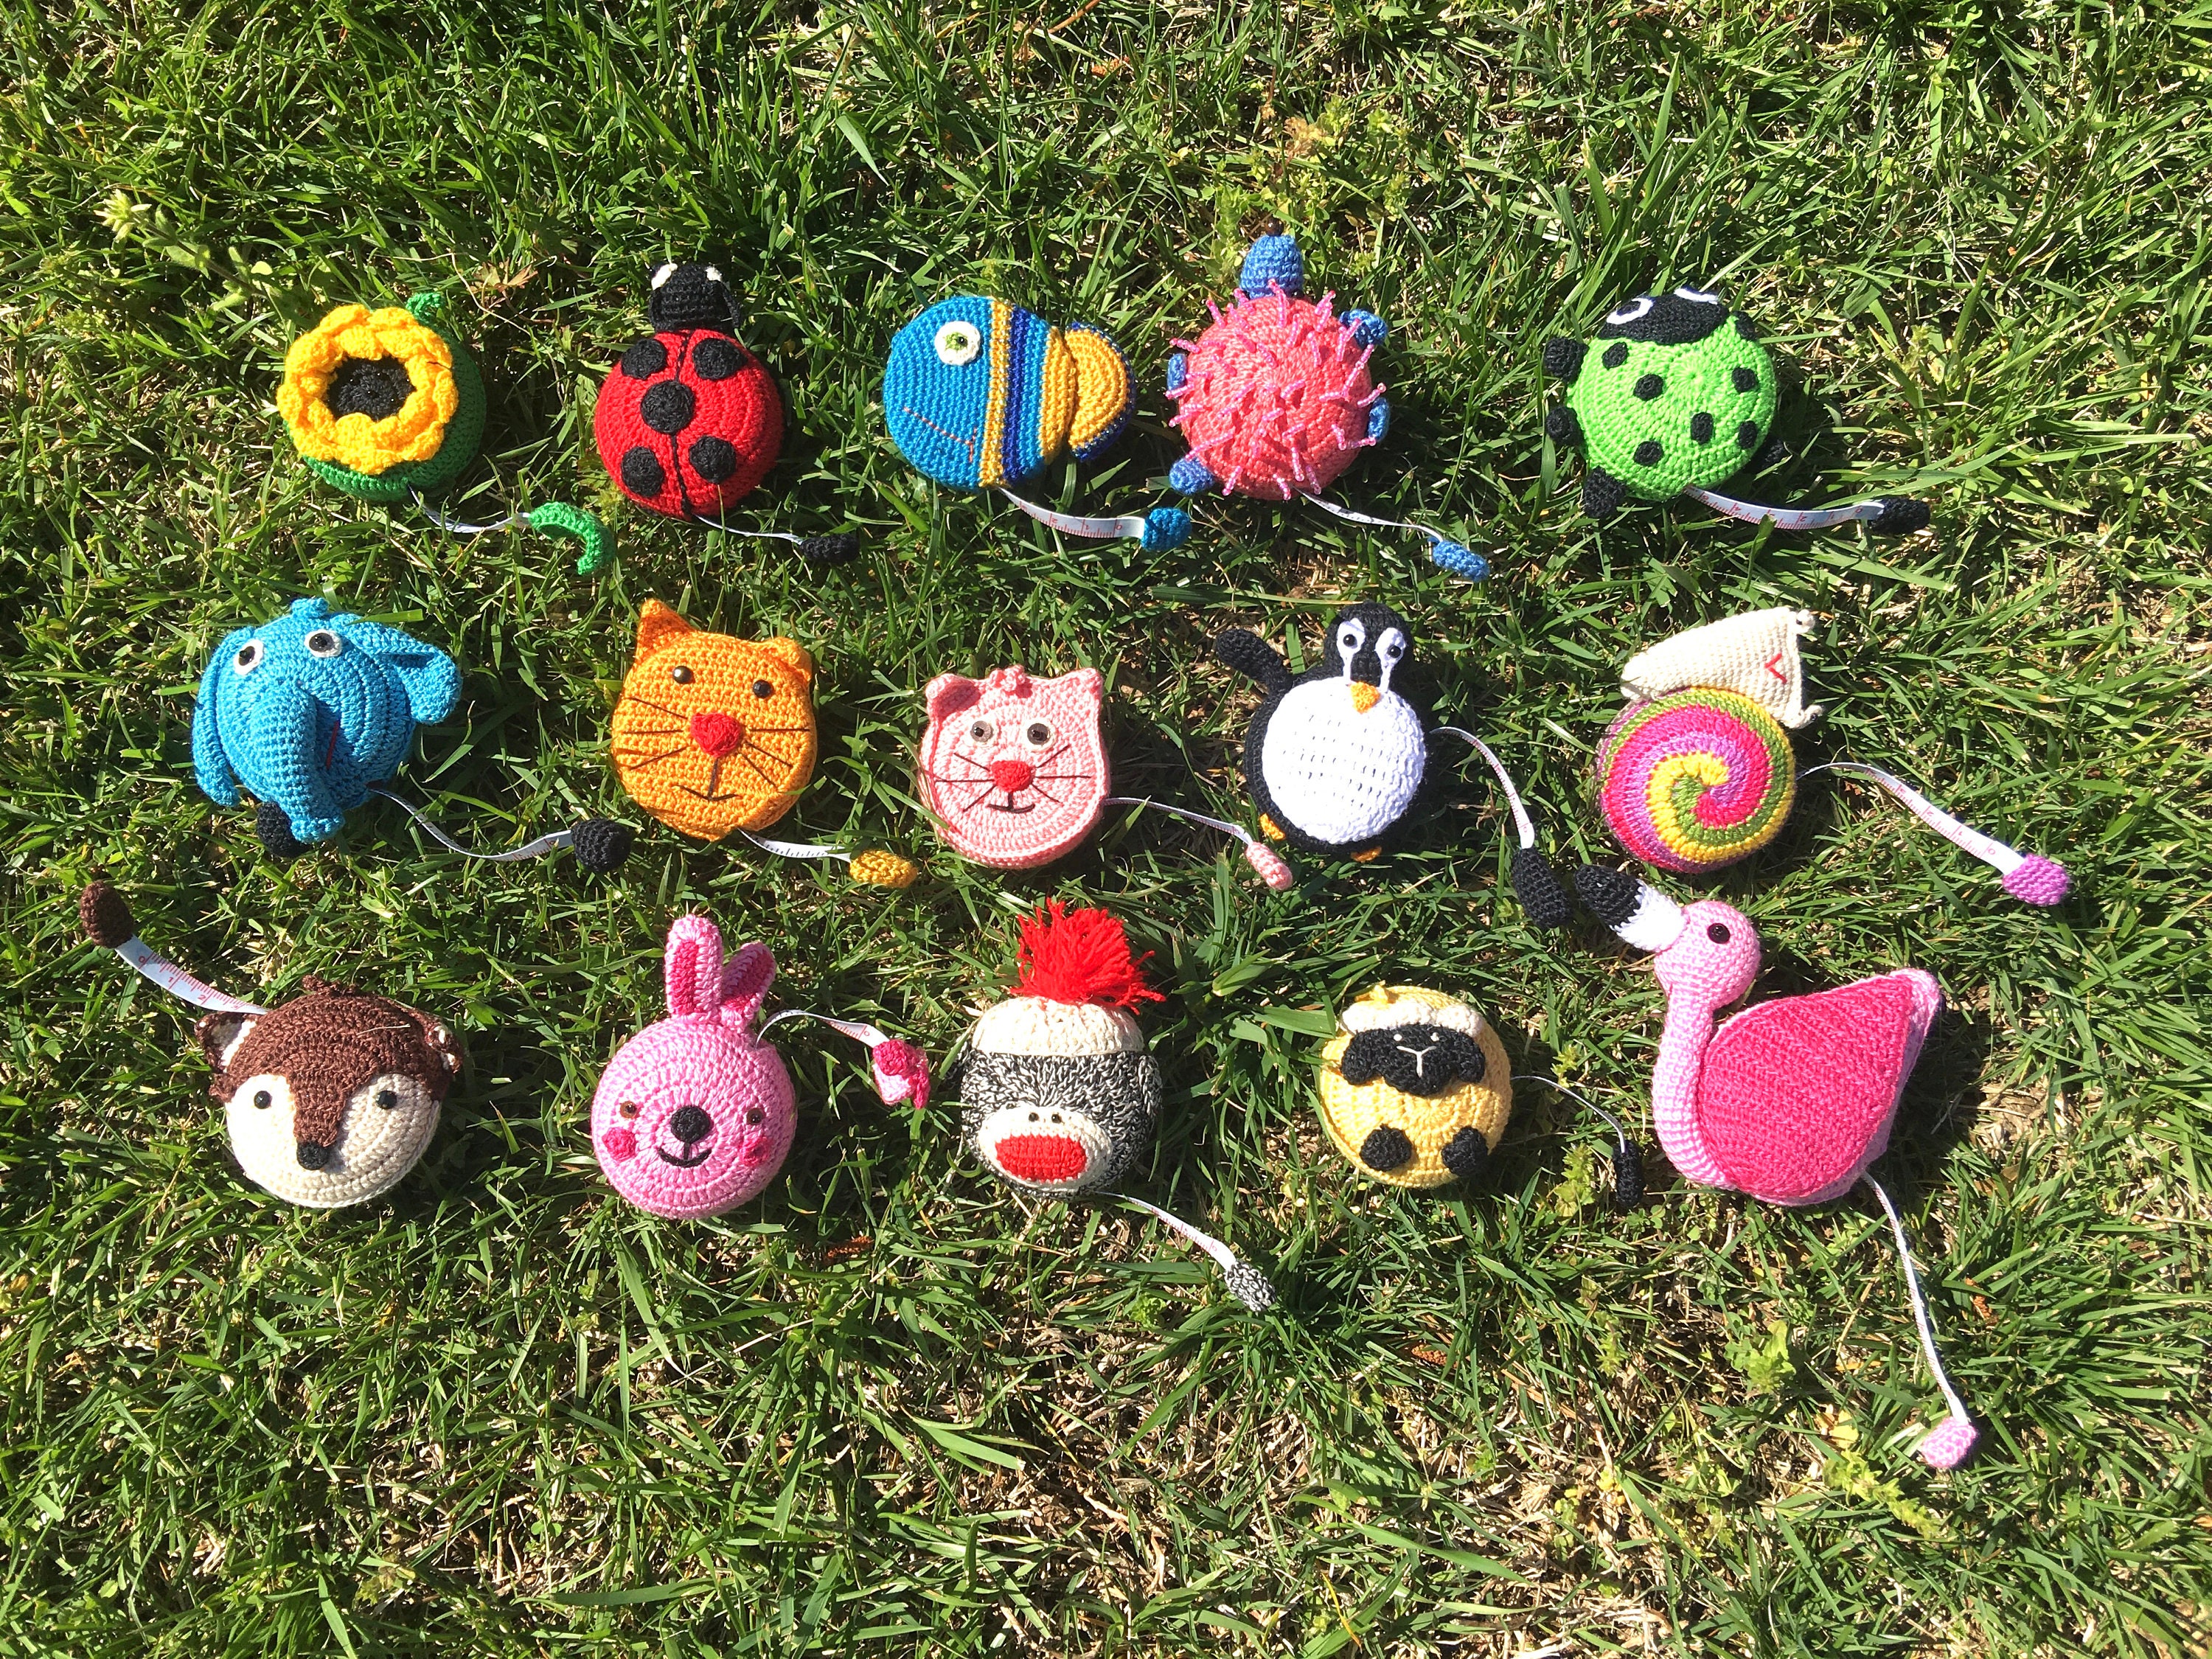 100cm Cute Retractable Tape Measure Kawaii Animal Roll Automatic Sewing Tape  Measure Ruler Measuring Tape Keychain